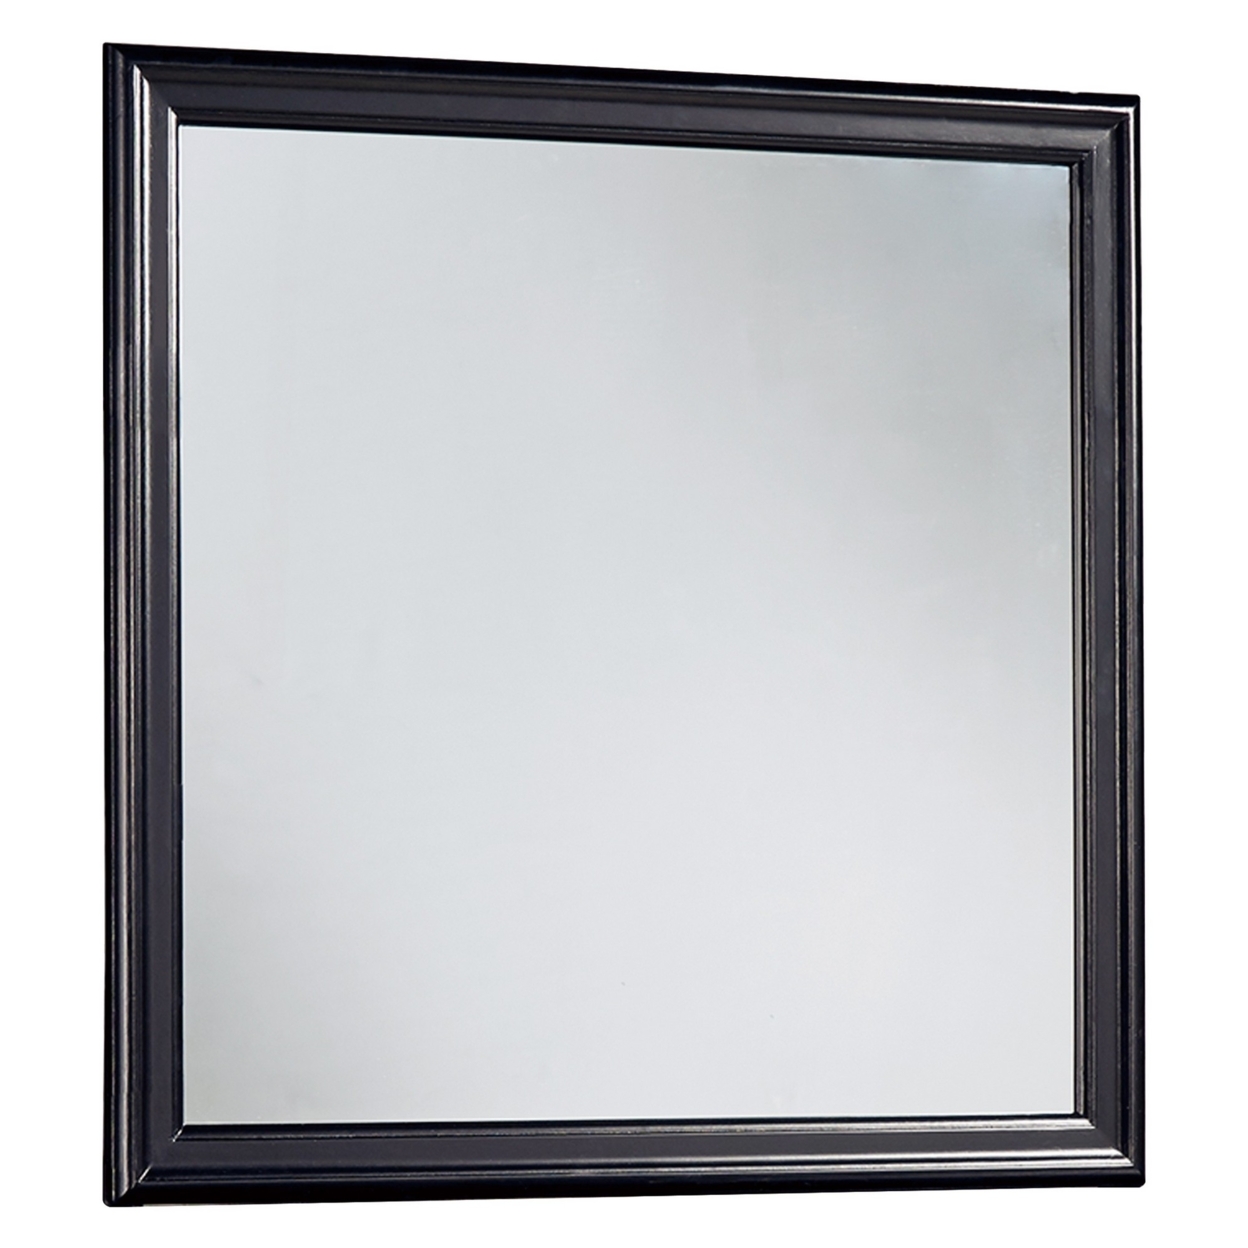 Wooden Frame Mirror With Mounting Hardware, Black And Silver- Saltoro Sherpi